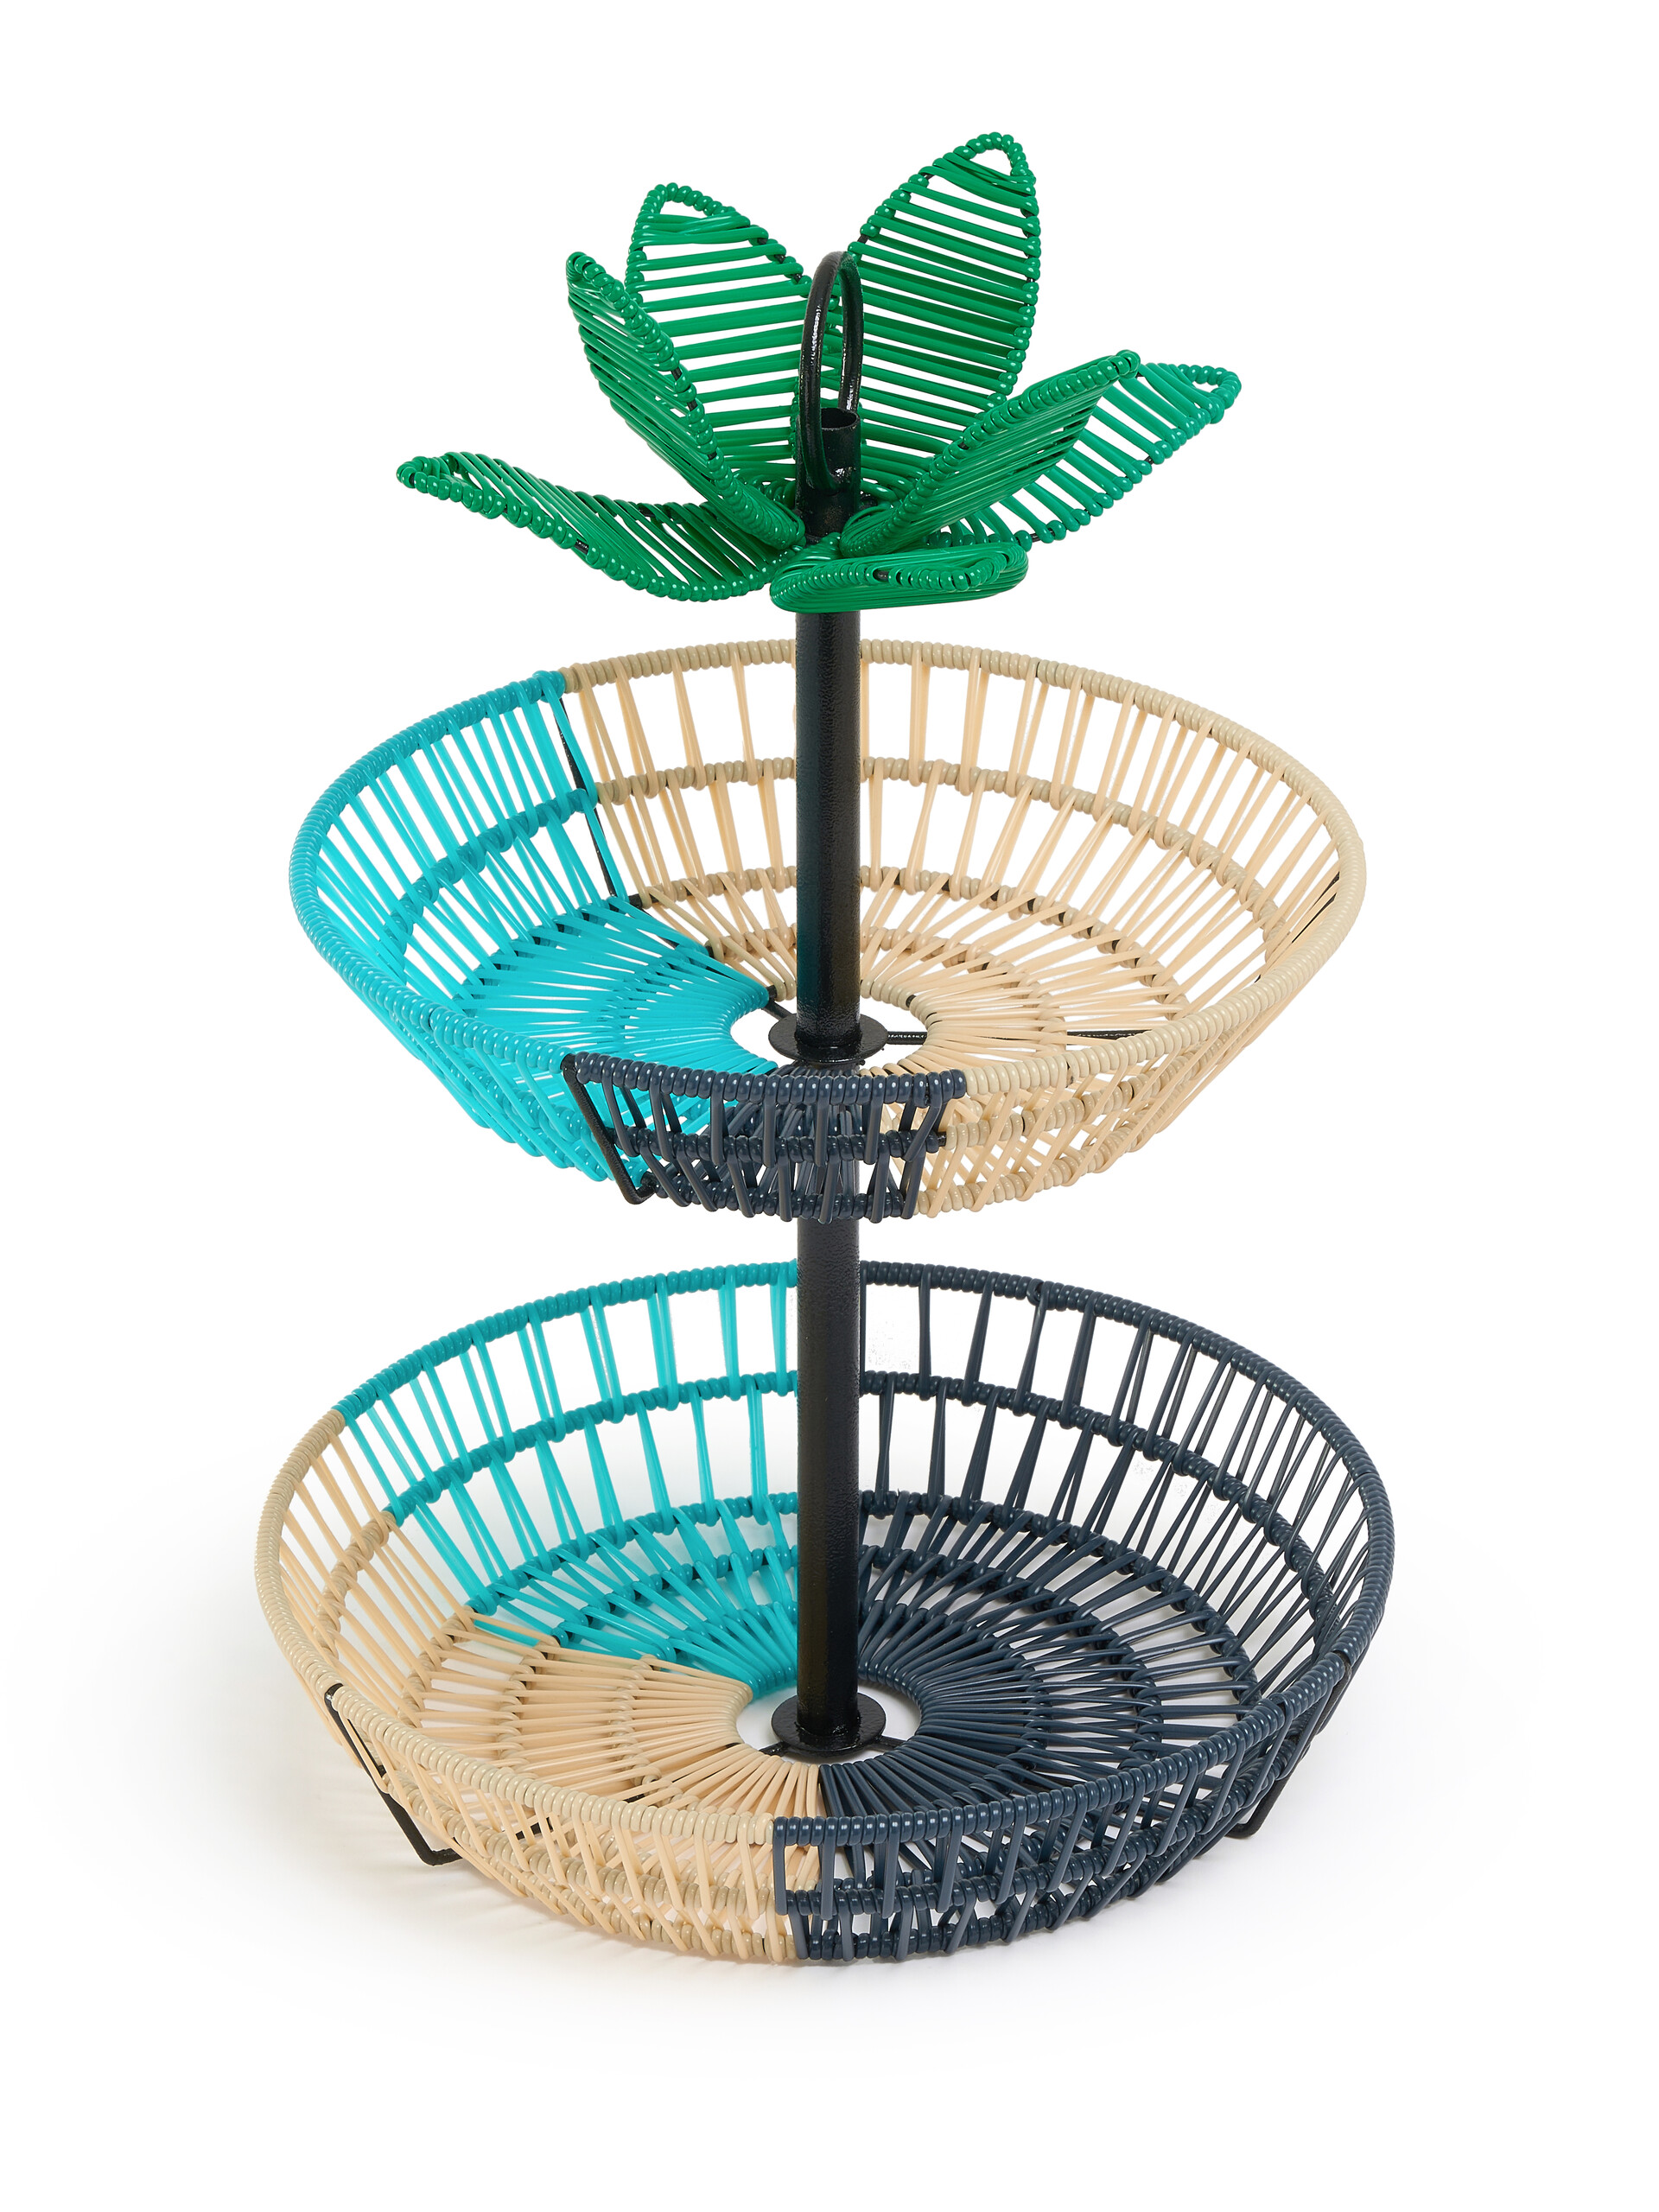 Turquoise And Beige Marni Market Two-Tier Leaf Fruit Basket - Accessories - Image 3